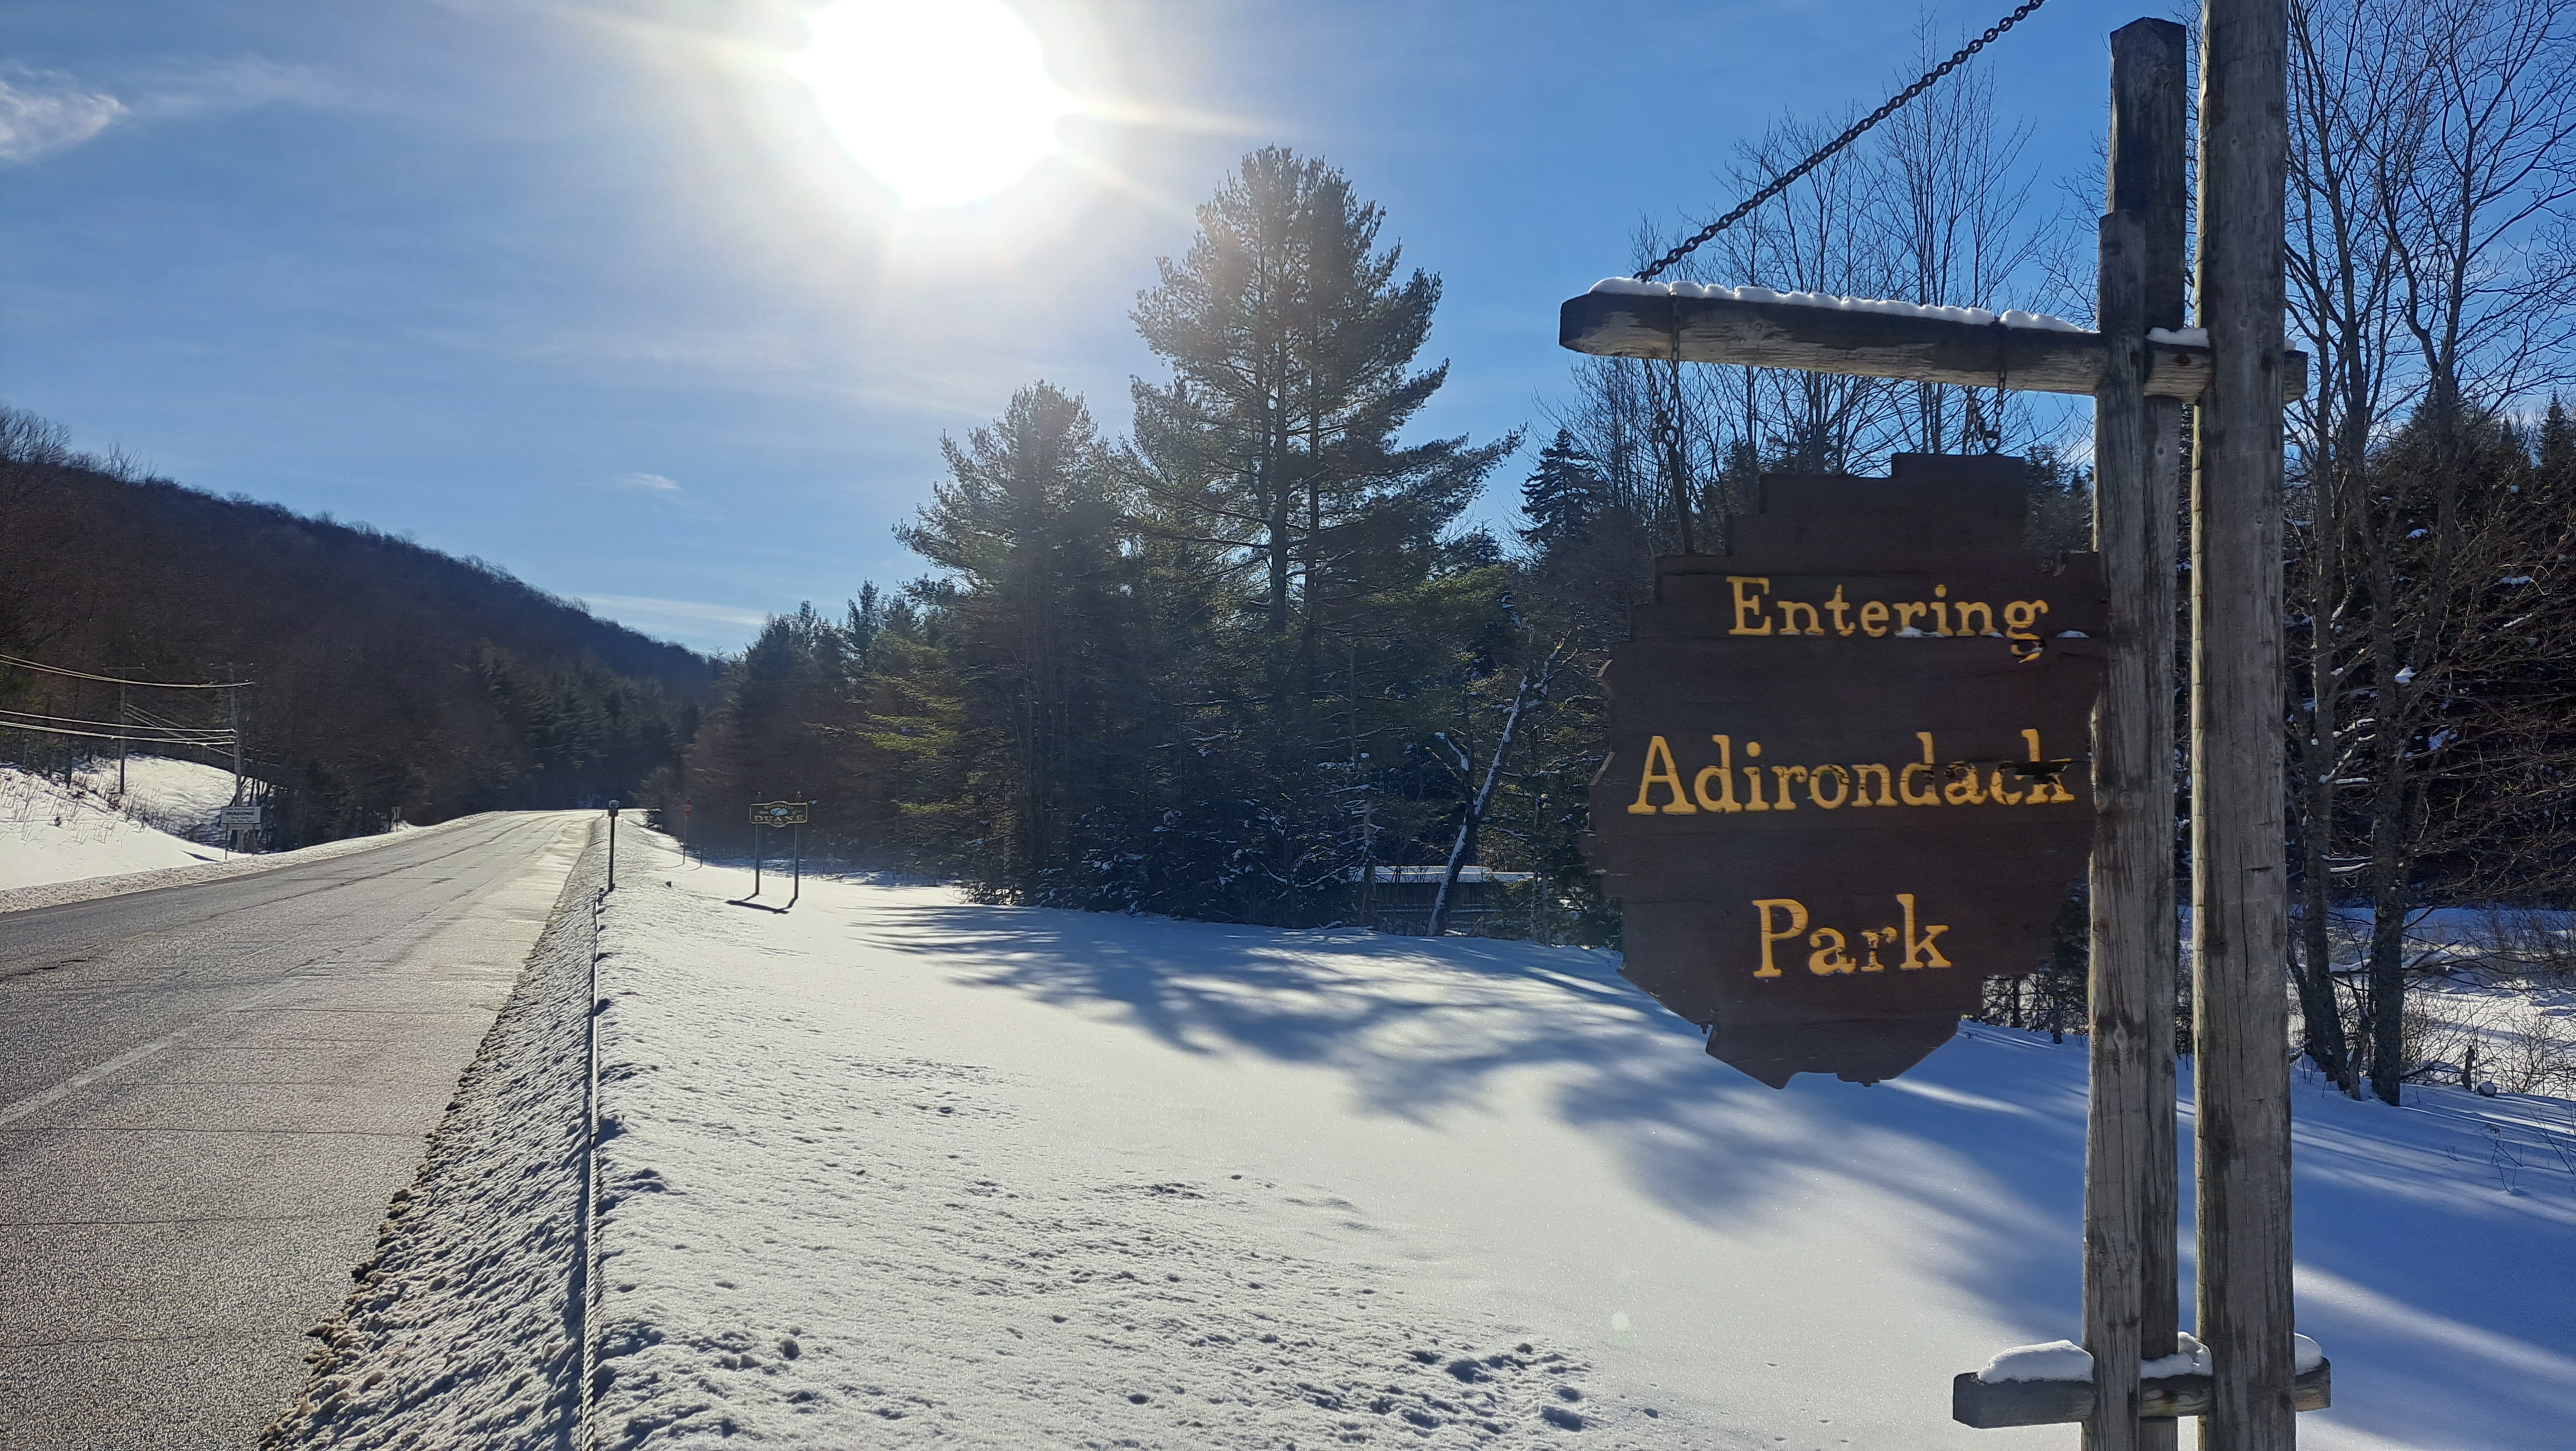 Sign welcoming to the Adirondack Park